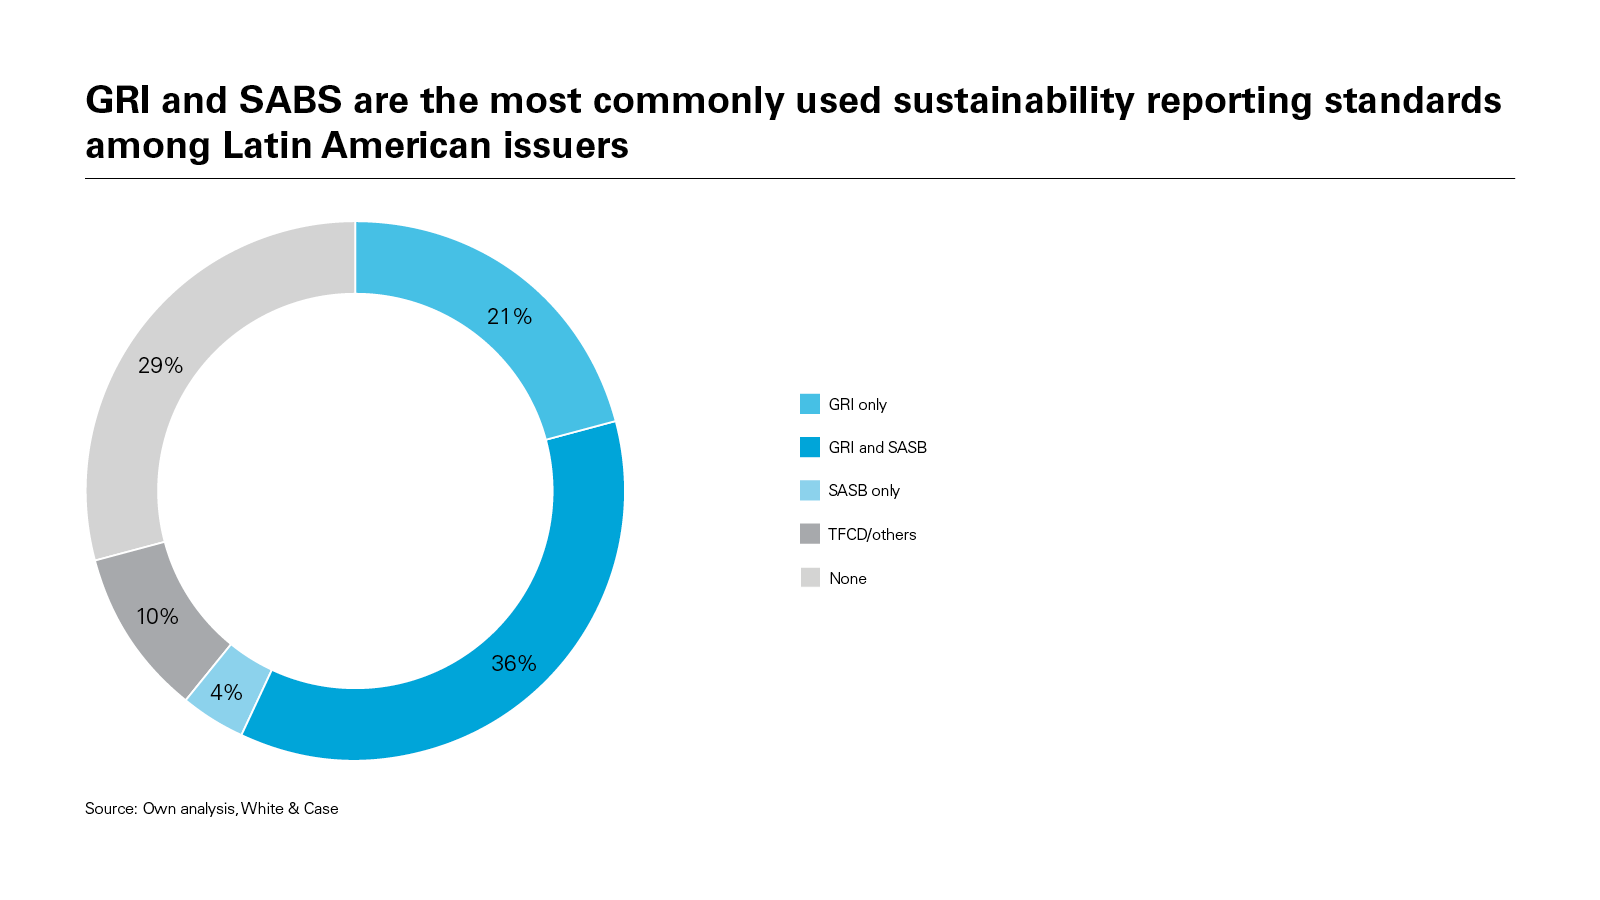 GRI and SABS are the most commonly used sustainability reporting standards among Latin American issuers